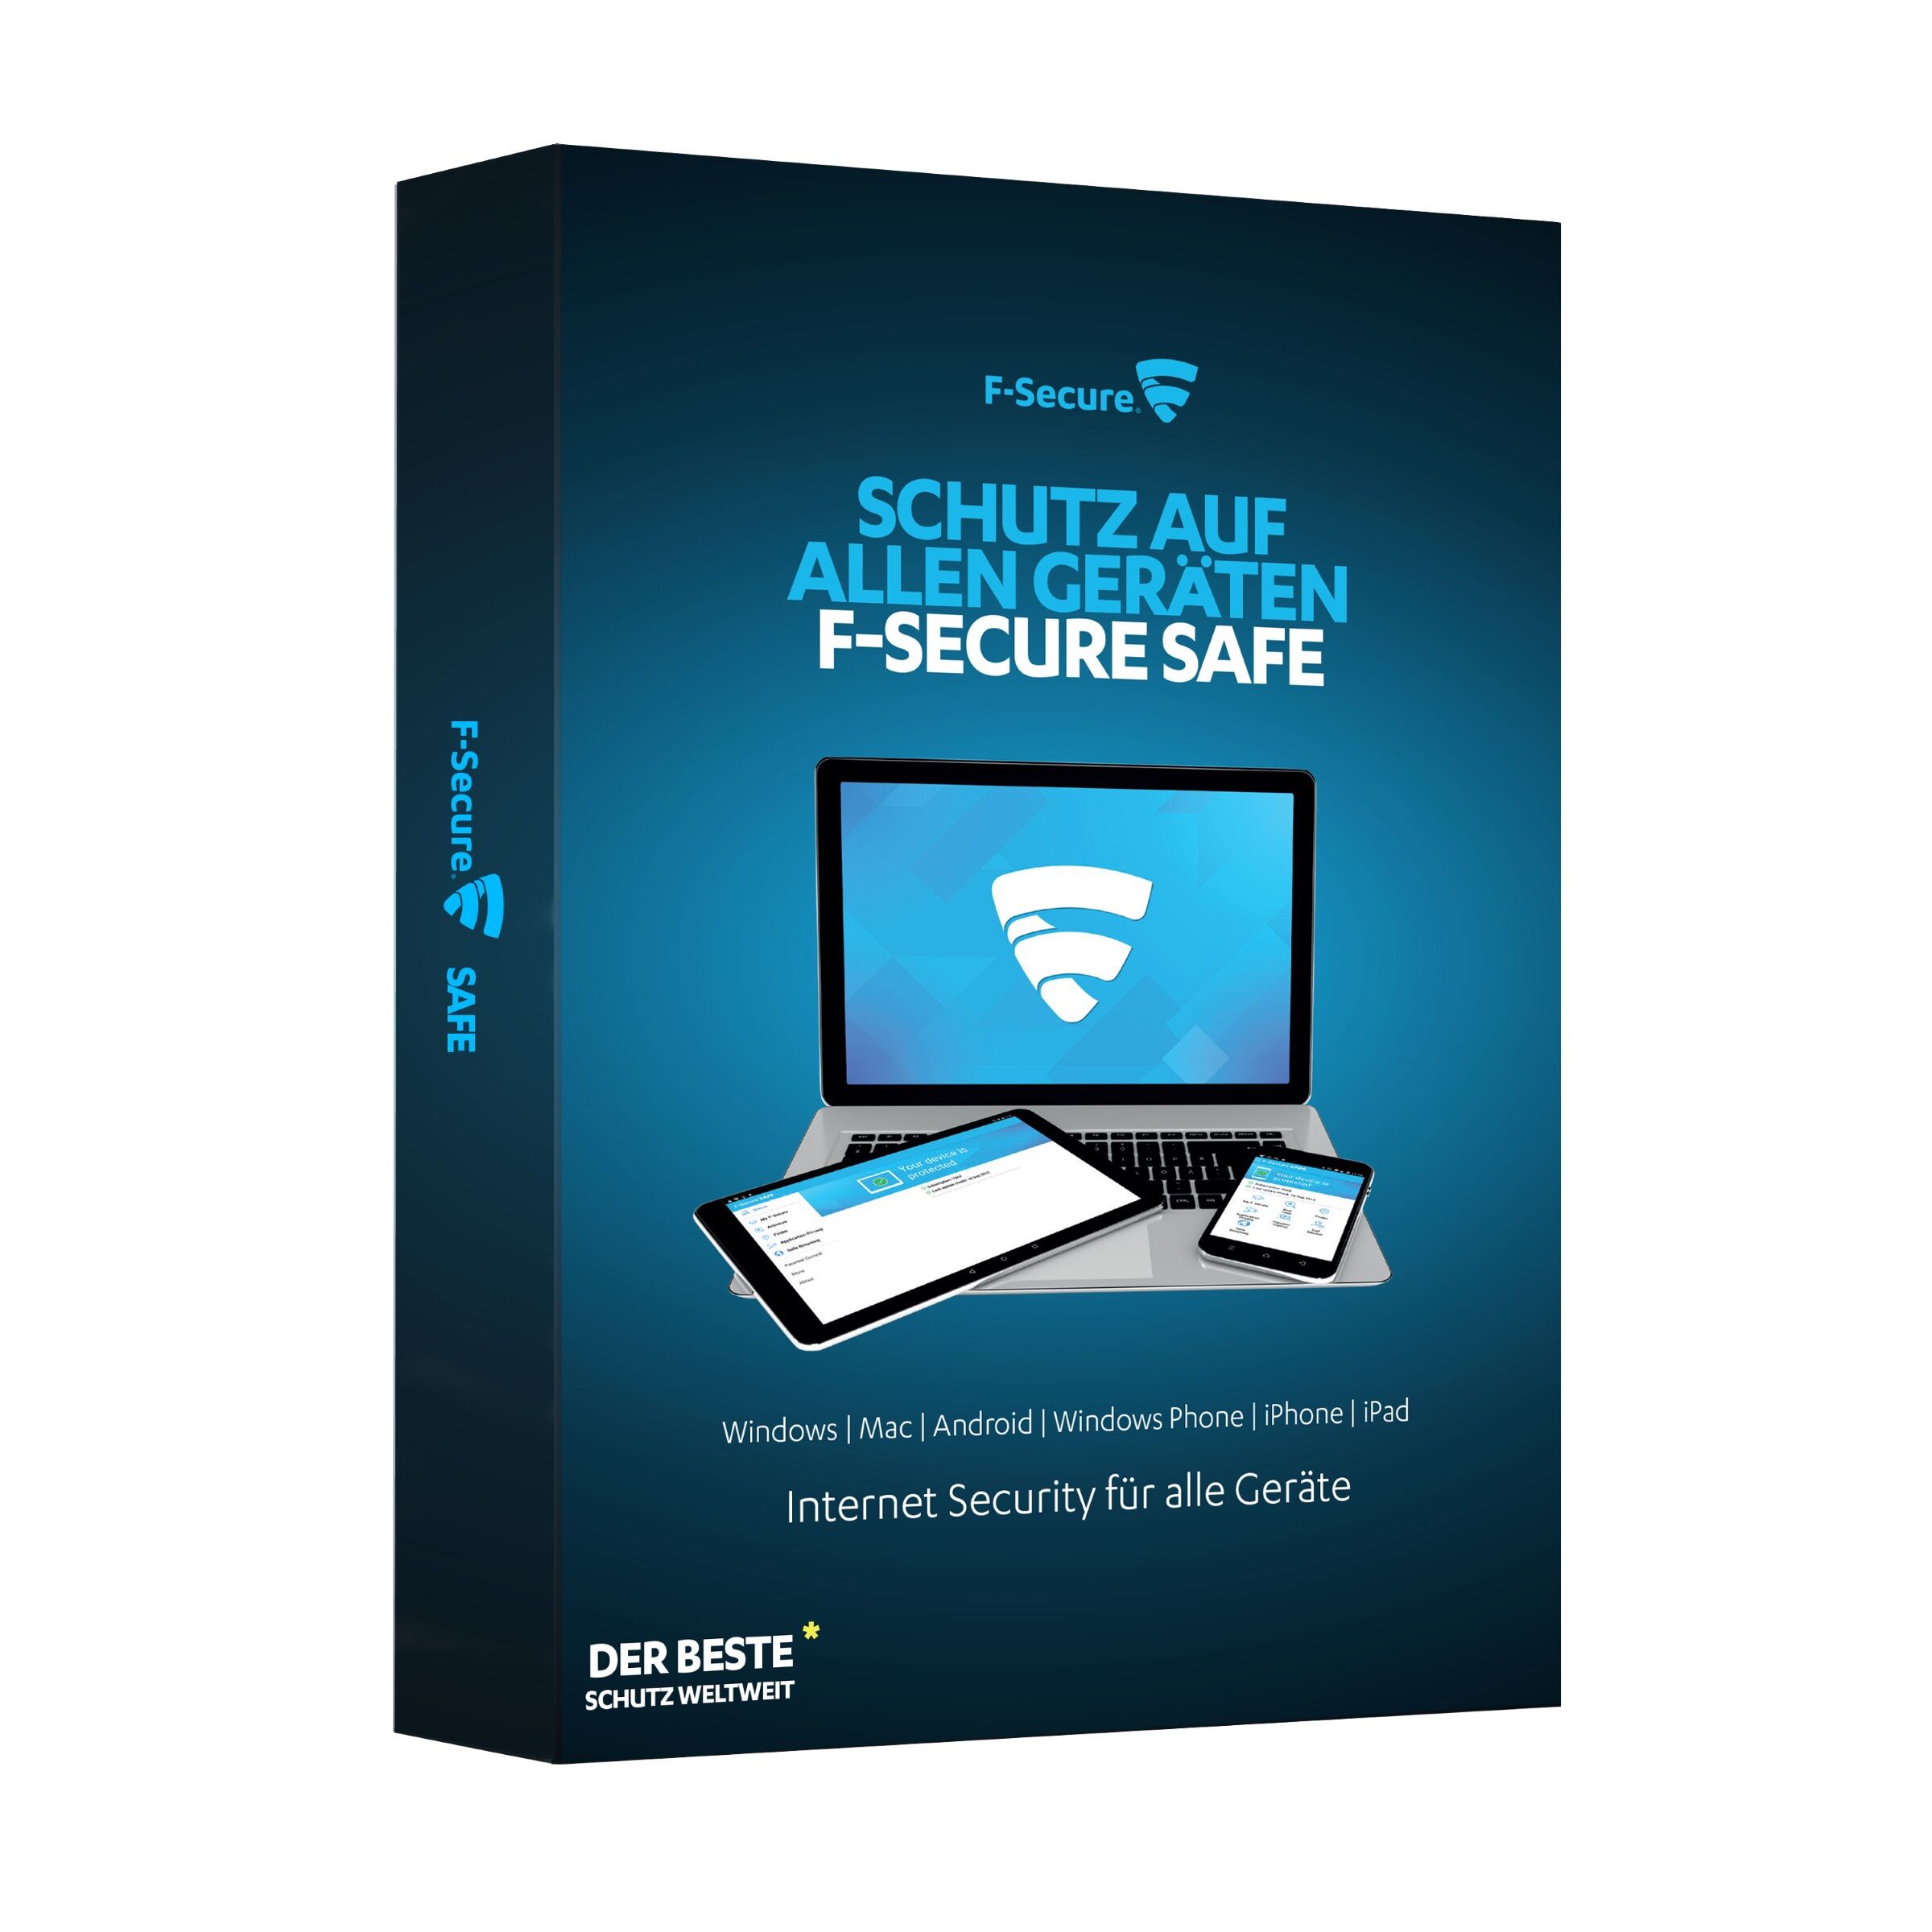 F-secure mac free download itunes download apple